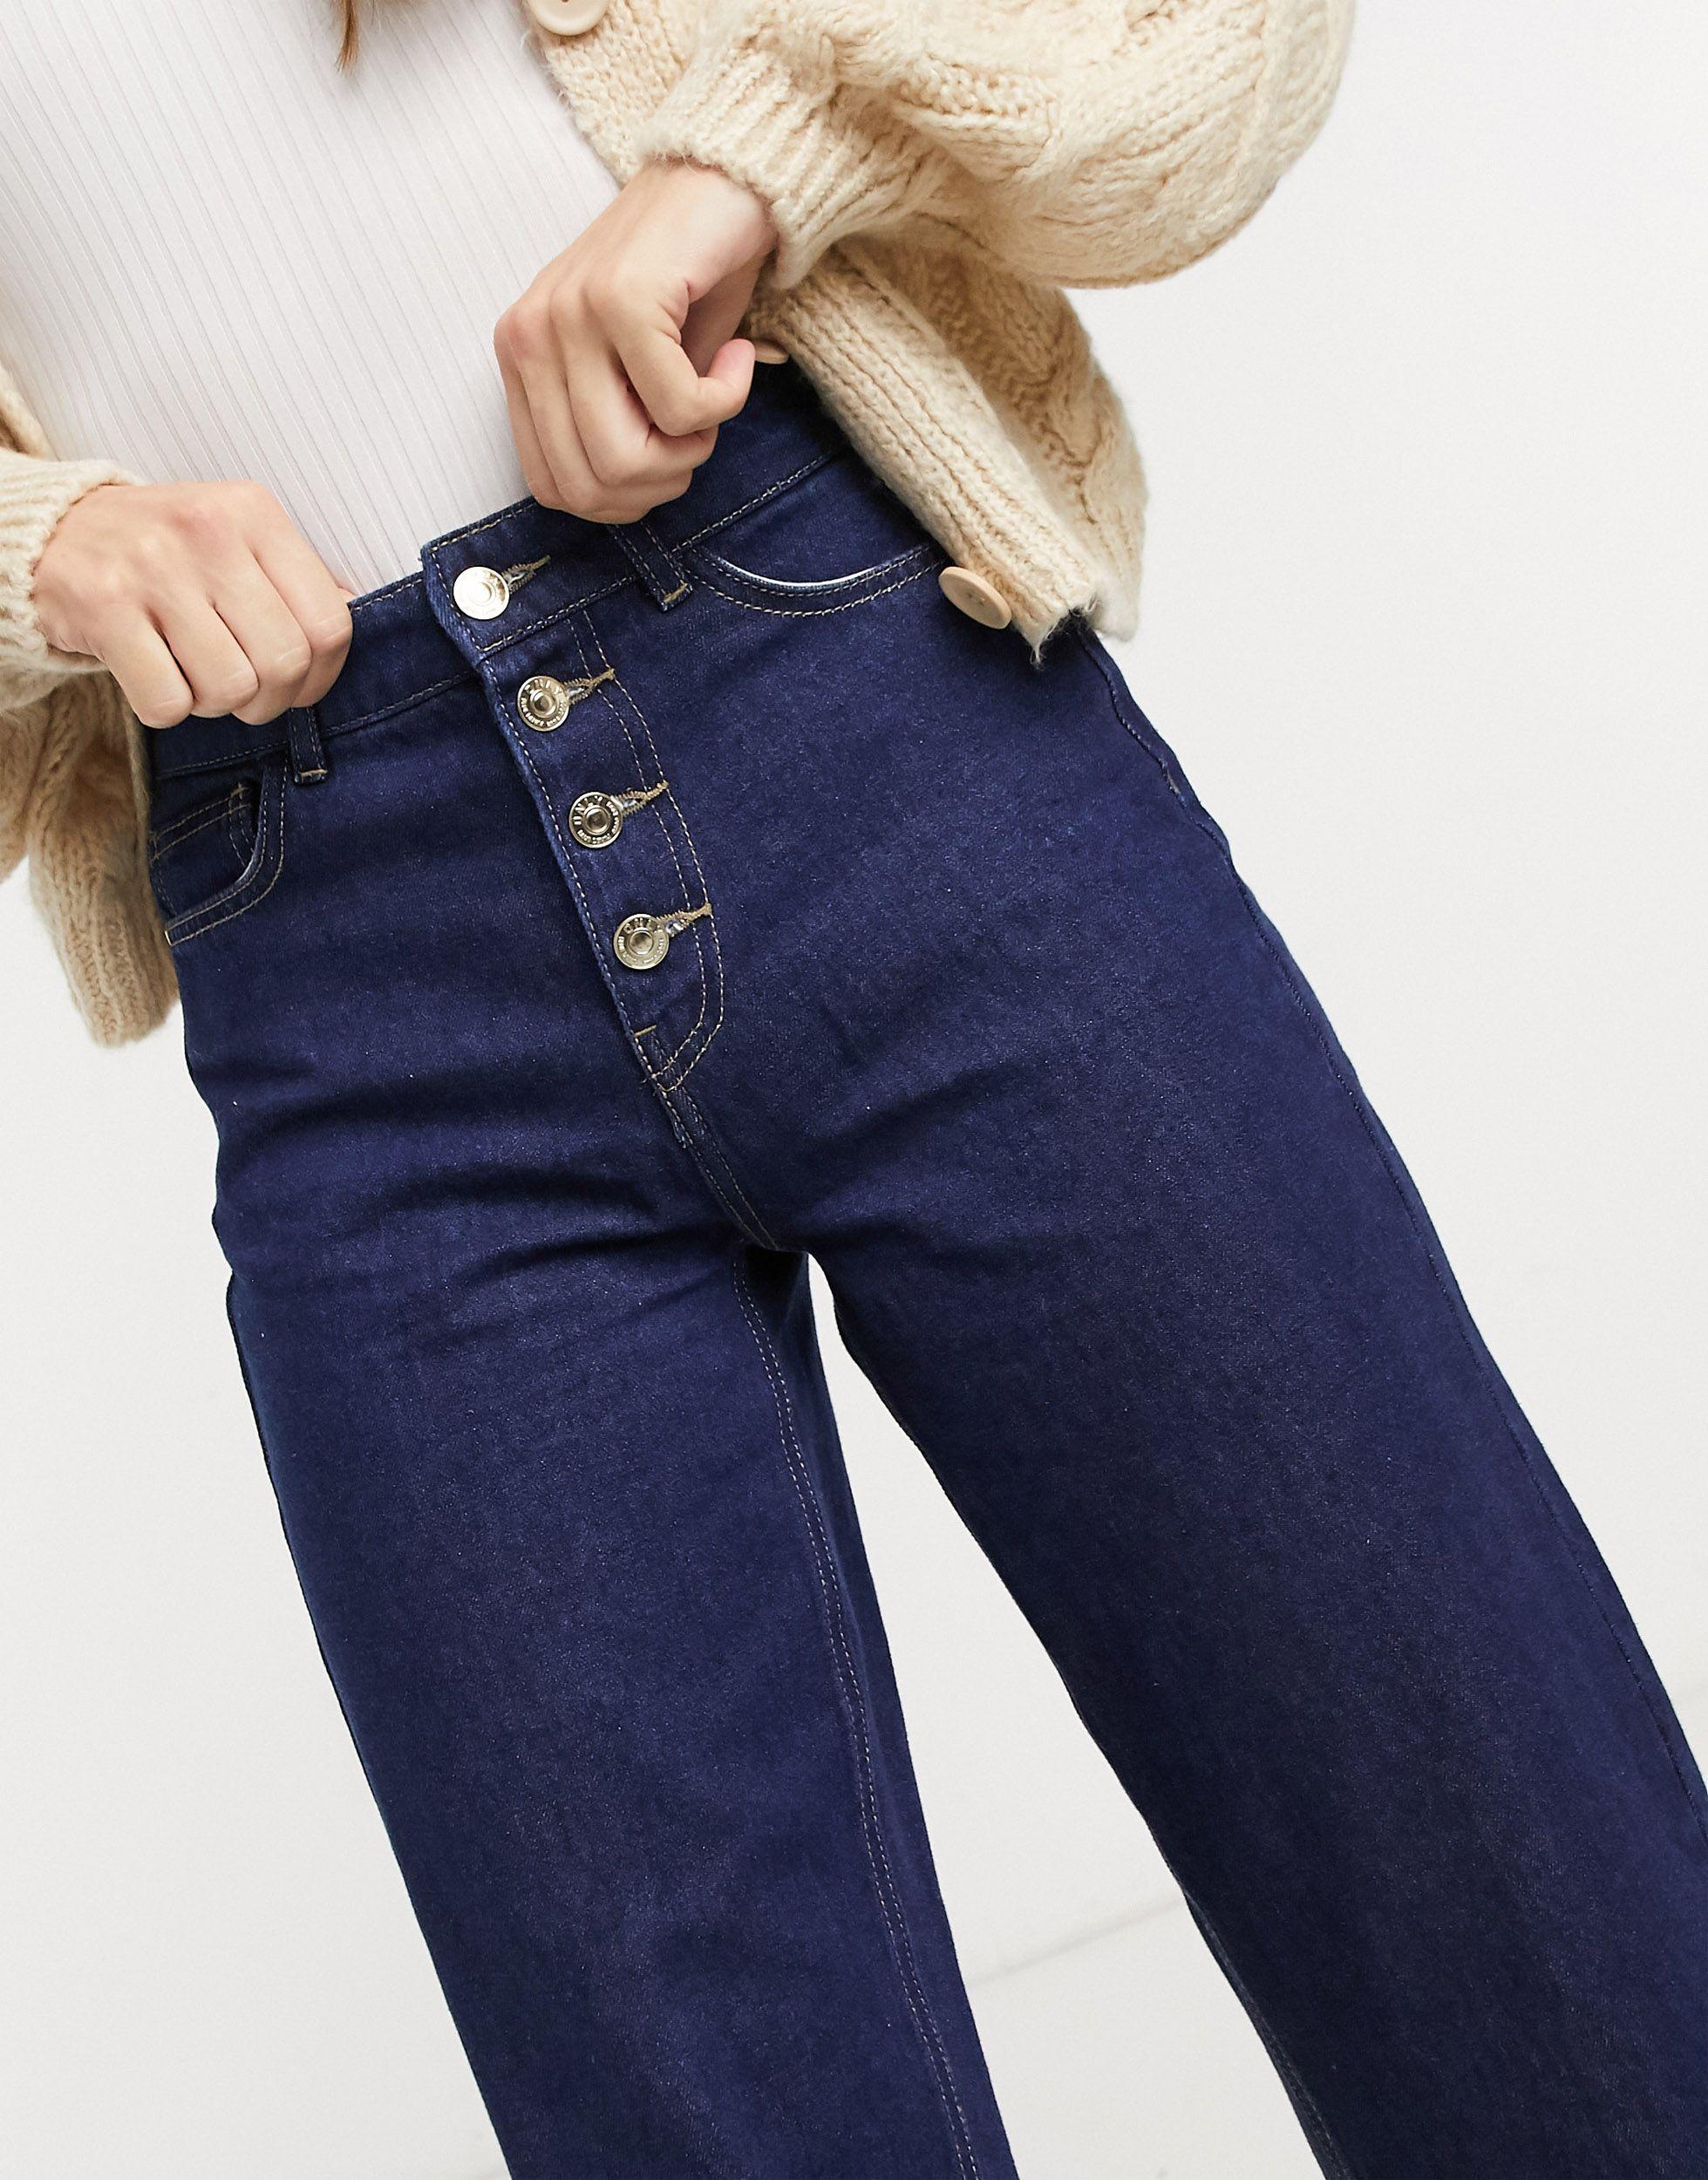 ONLY Molly High Waisted Button Detail Wide Leg Jeans in Blue | Lyst